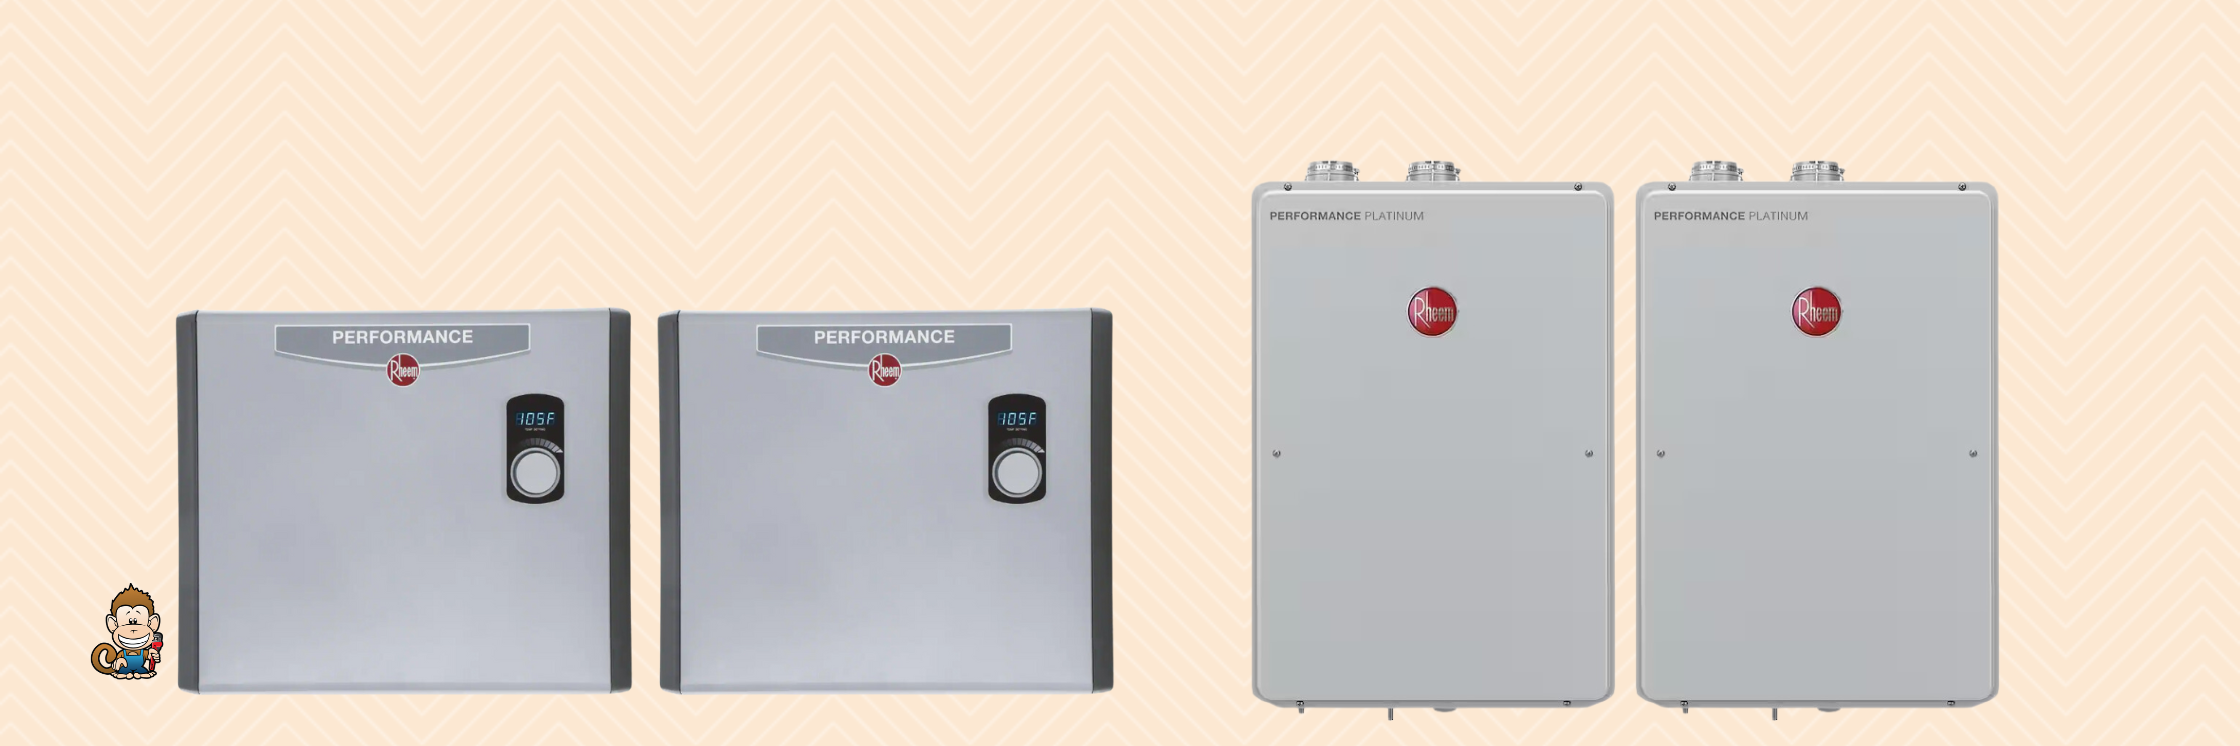 Gas VS Electric Tankless Water Heaters Video